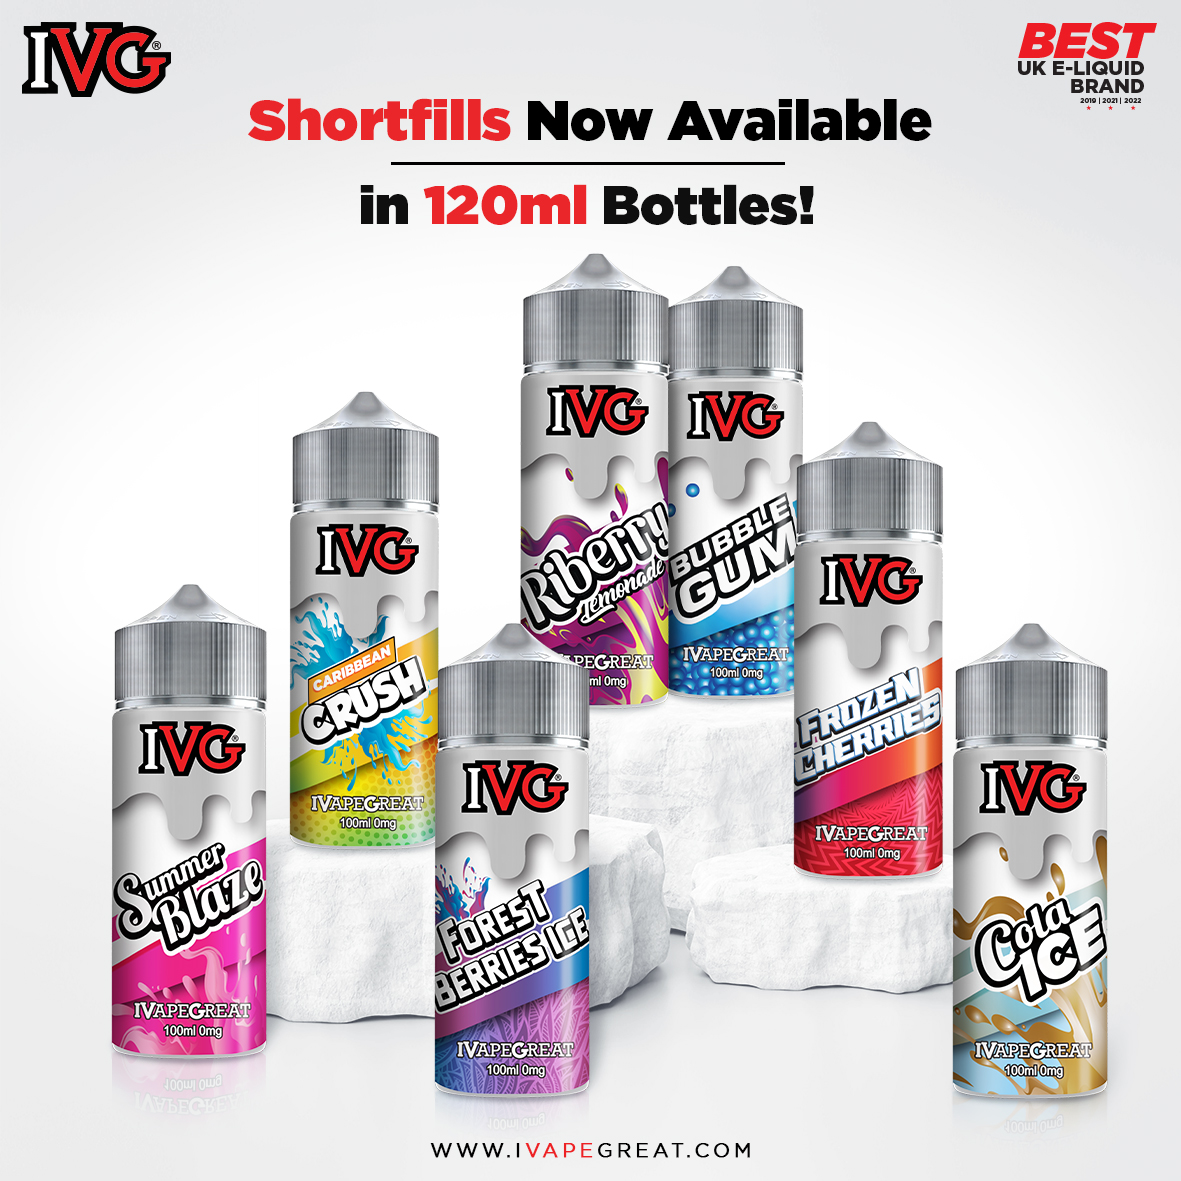 📣 ATTENTION 📣 

🌟 Your 15 favourite IVG shortfills now available in a BIGGER 120ml Bottle 🌟 

The 120ml 70/30 mix contains 100ml of e-liquid with room for you to add your own nicotine shots.

#ivapegreat #ivg #shortfill #eliquid #vapenation